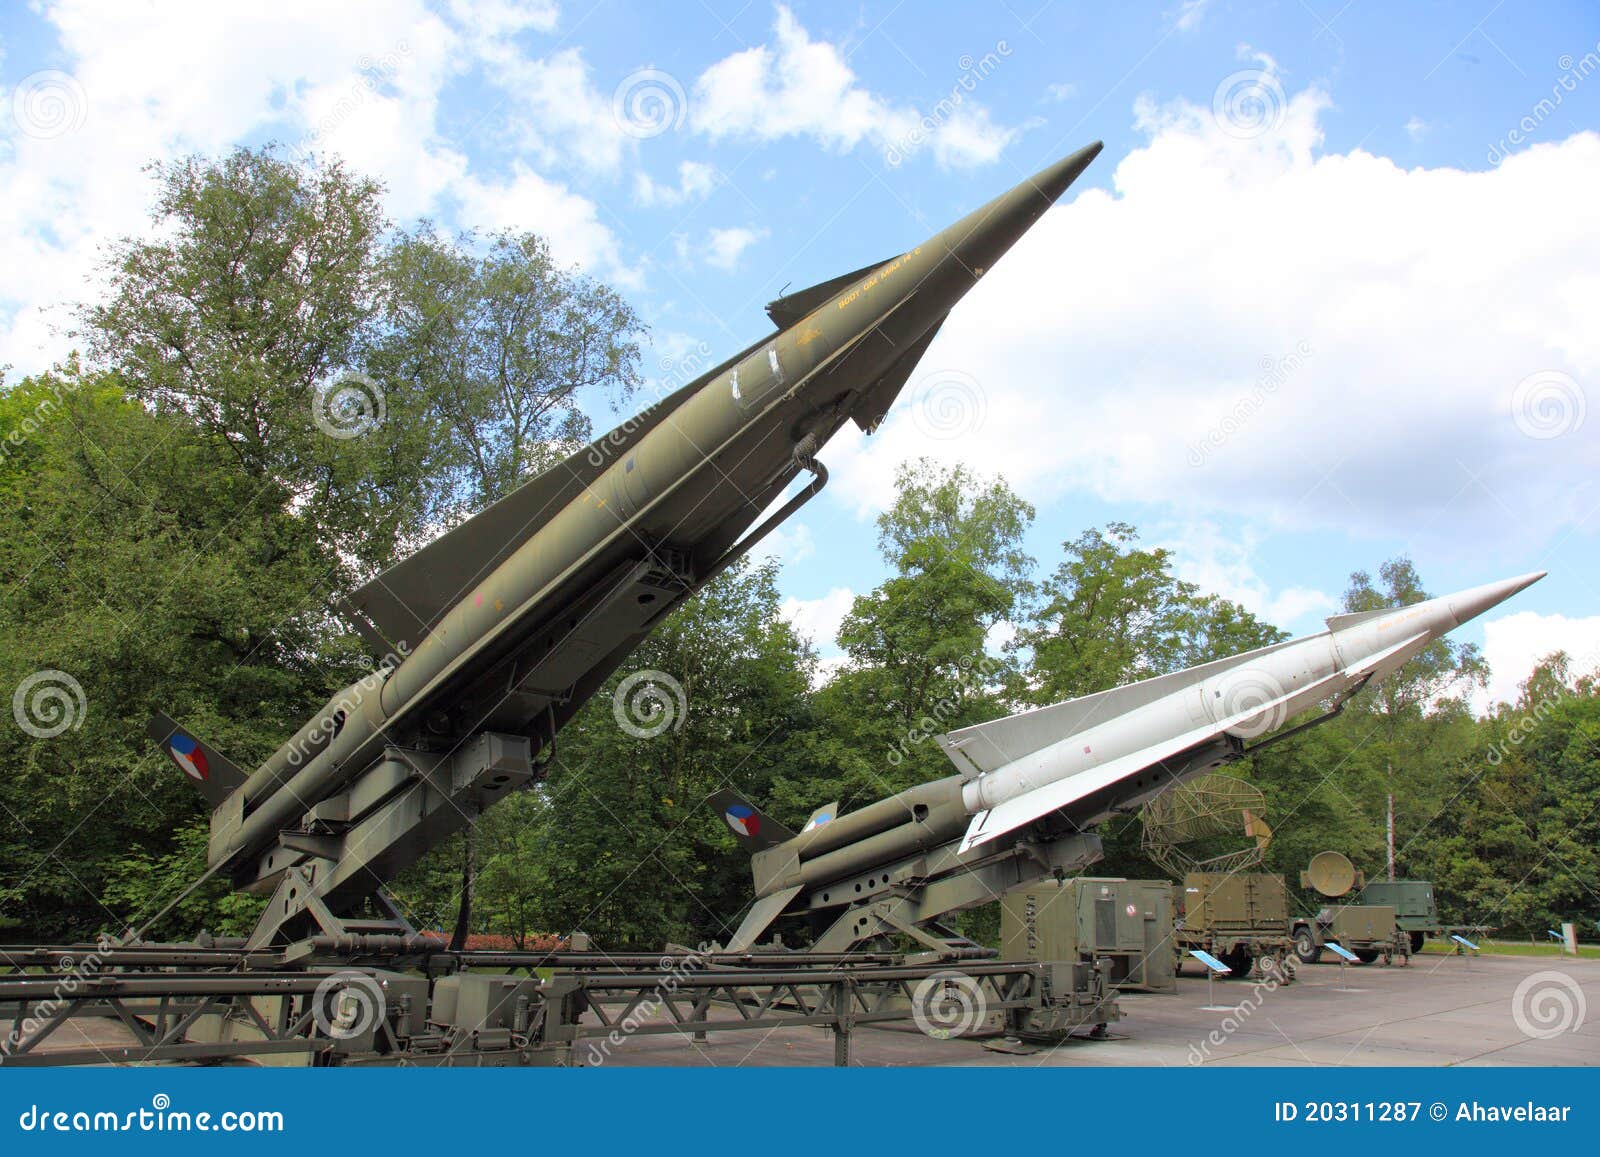 Anti Aircraft Missiles Nike Hercules Editorial Photography - of aircraft, missile: 20311287